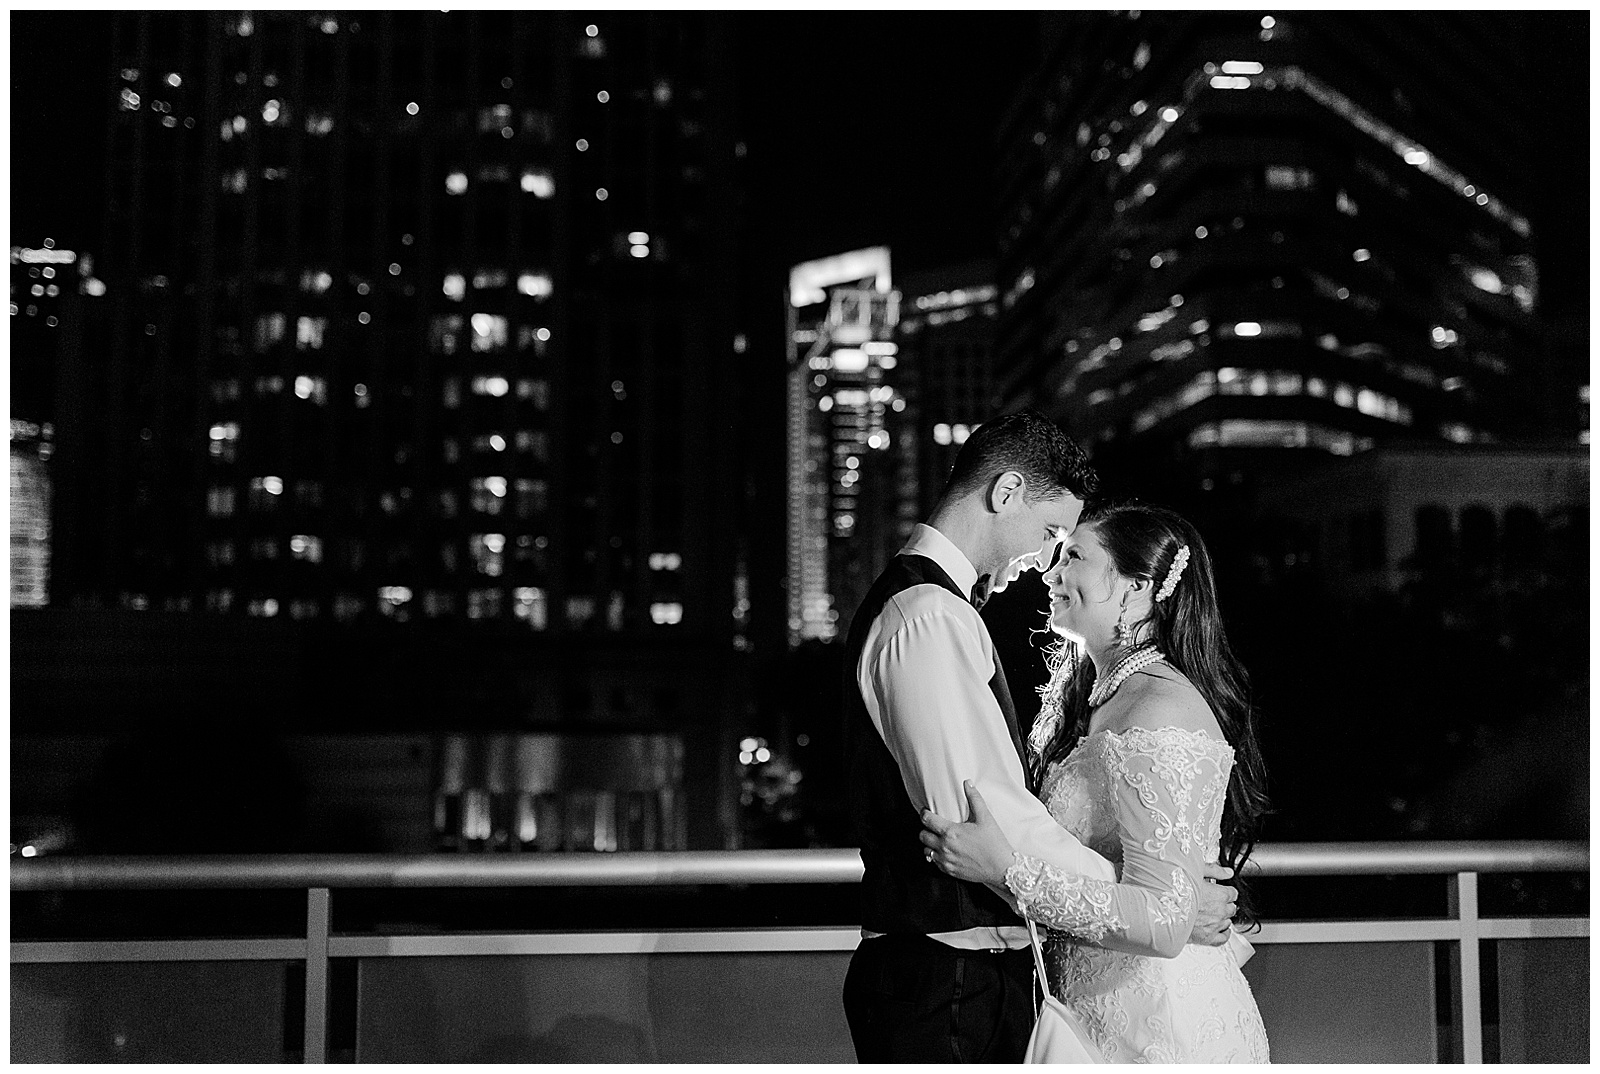 💍 bride groom outdoor black and white portrait after wedding with downtown city lights in background 👰 Bride: lace wedding dress with rhinestone belt rhinestone barrette in hair down with pearls 🤵 Groom: black tux tuxedo and purple flower boutonnière 💍 Bright Colorful Summer City Wedding in Charlotte, NC with Taryn and Ryan | Kevyn Dixon Photography